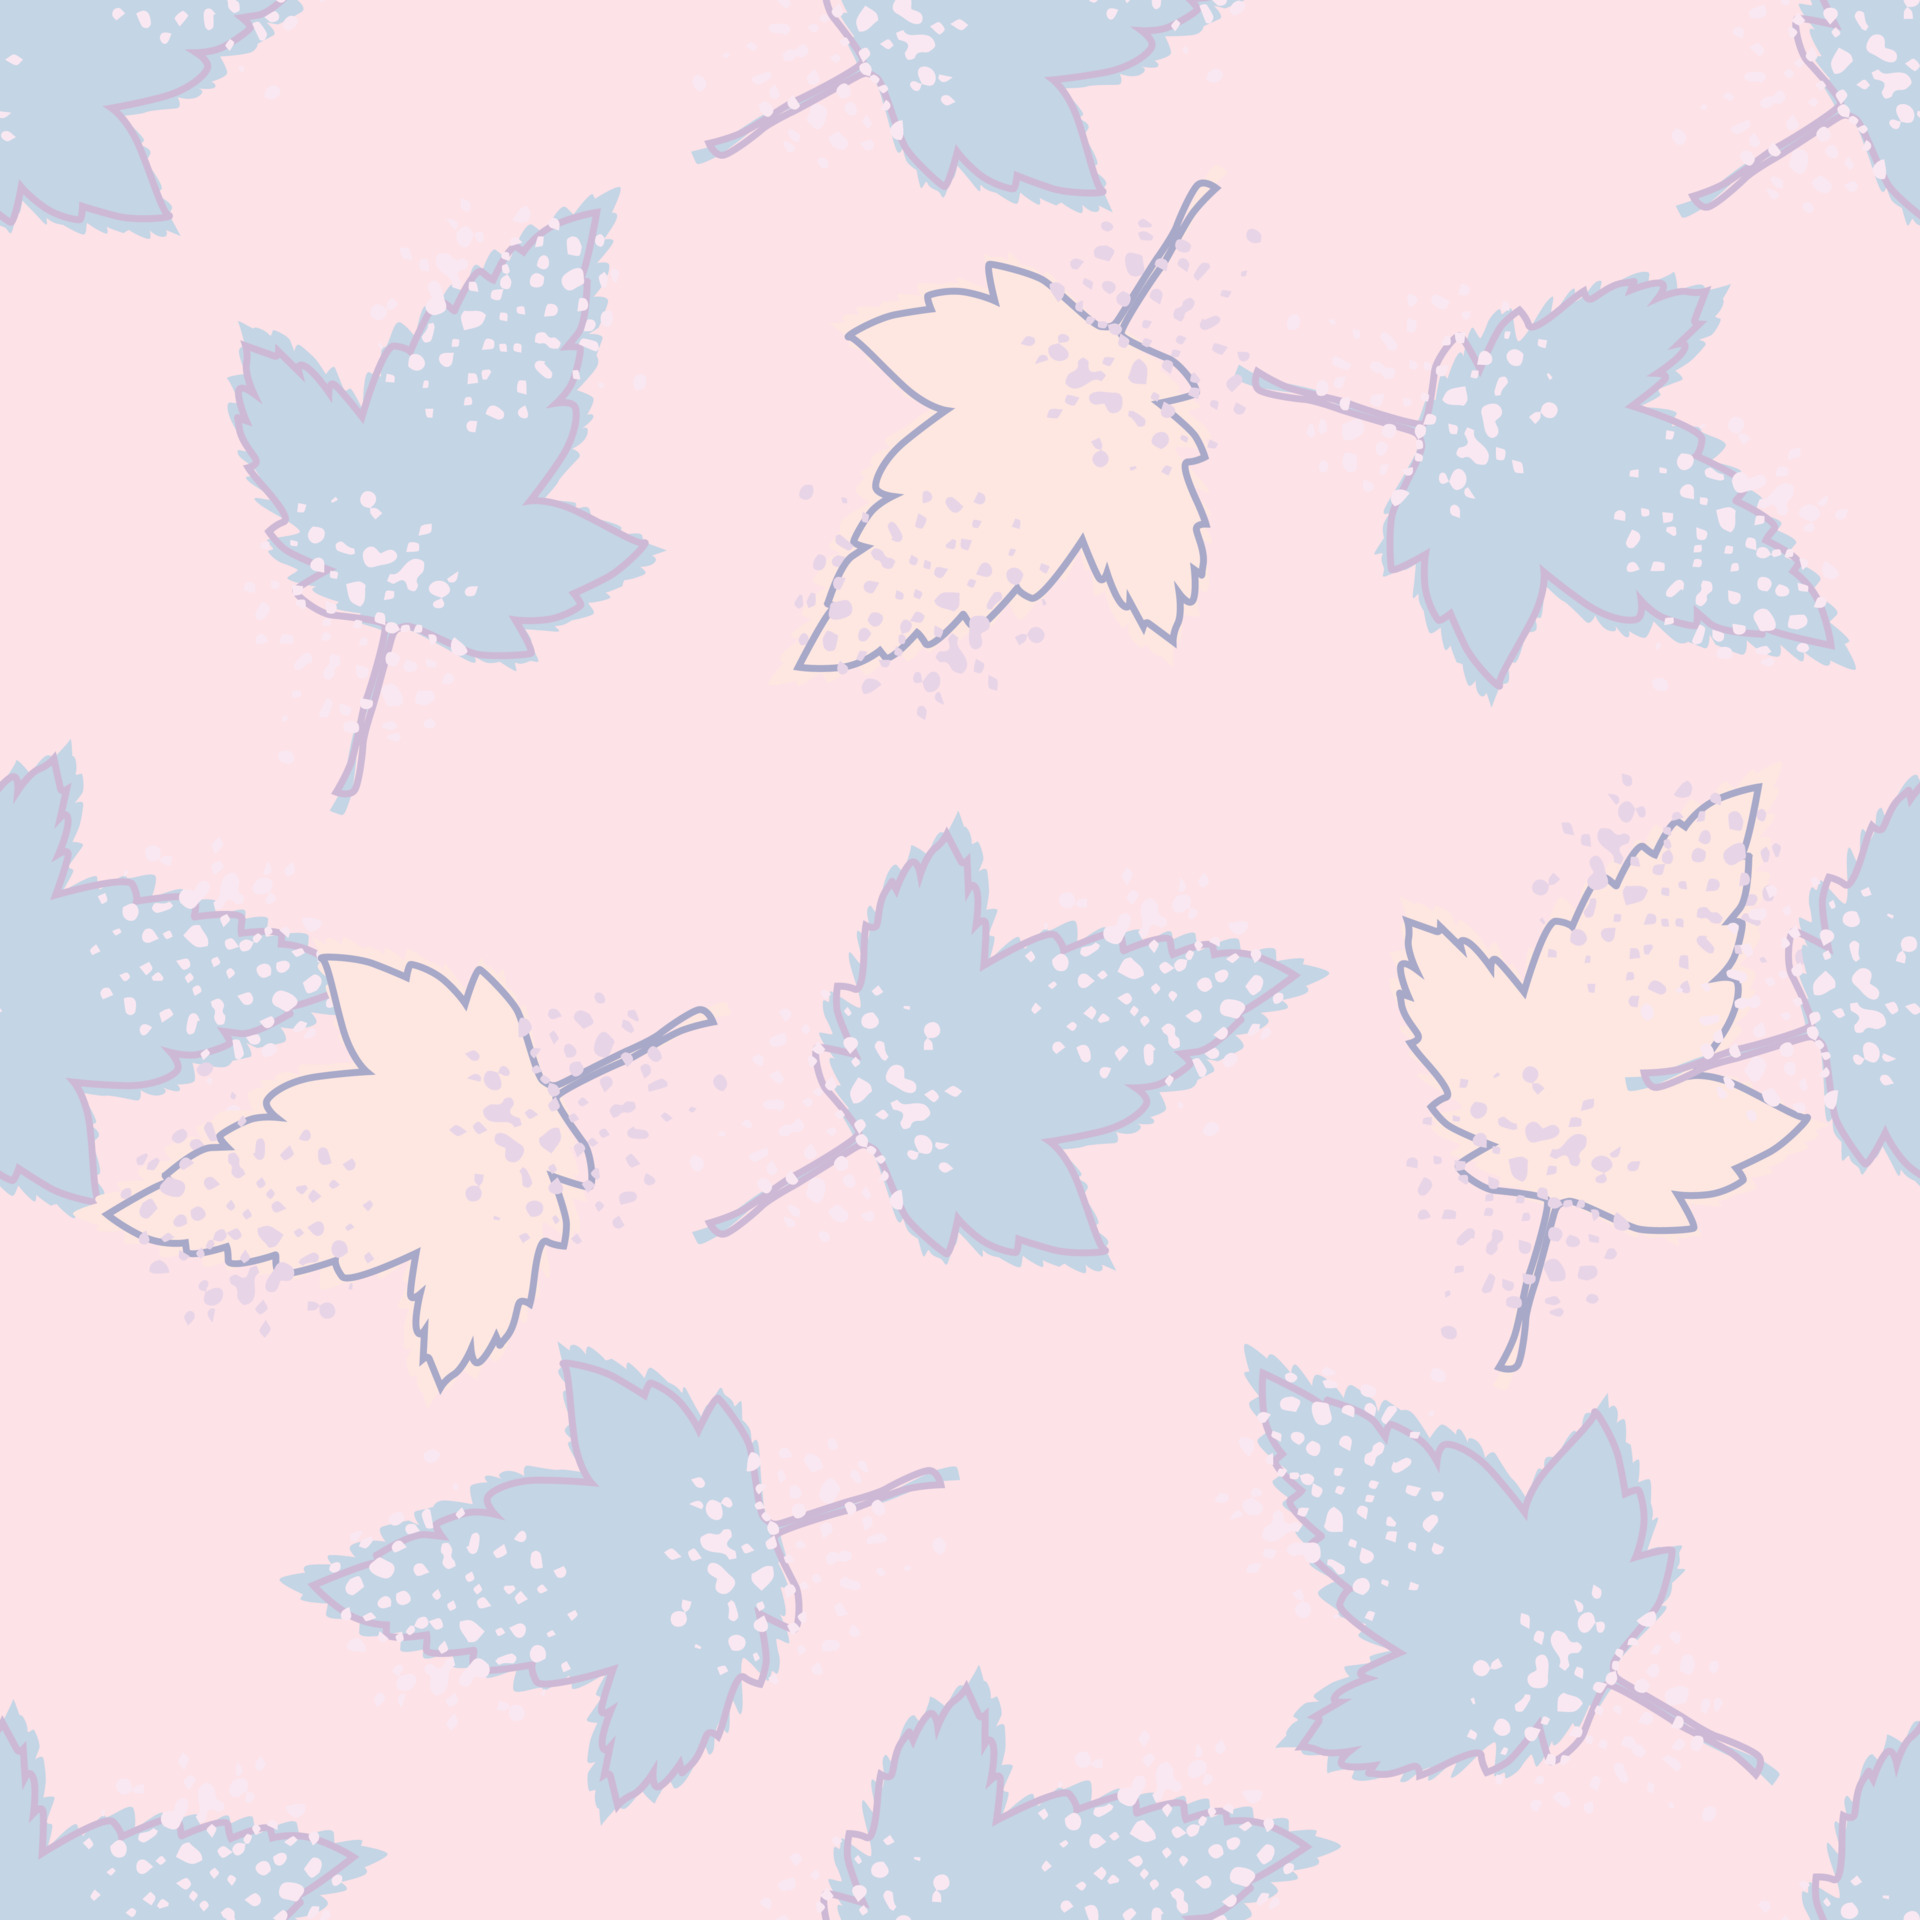 Abstract maple leaves seamless pattern on pink background. Cute autumn leaf wallpaper. Decorative backdrop for fabric design